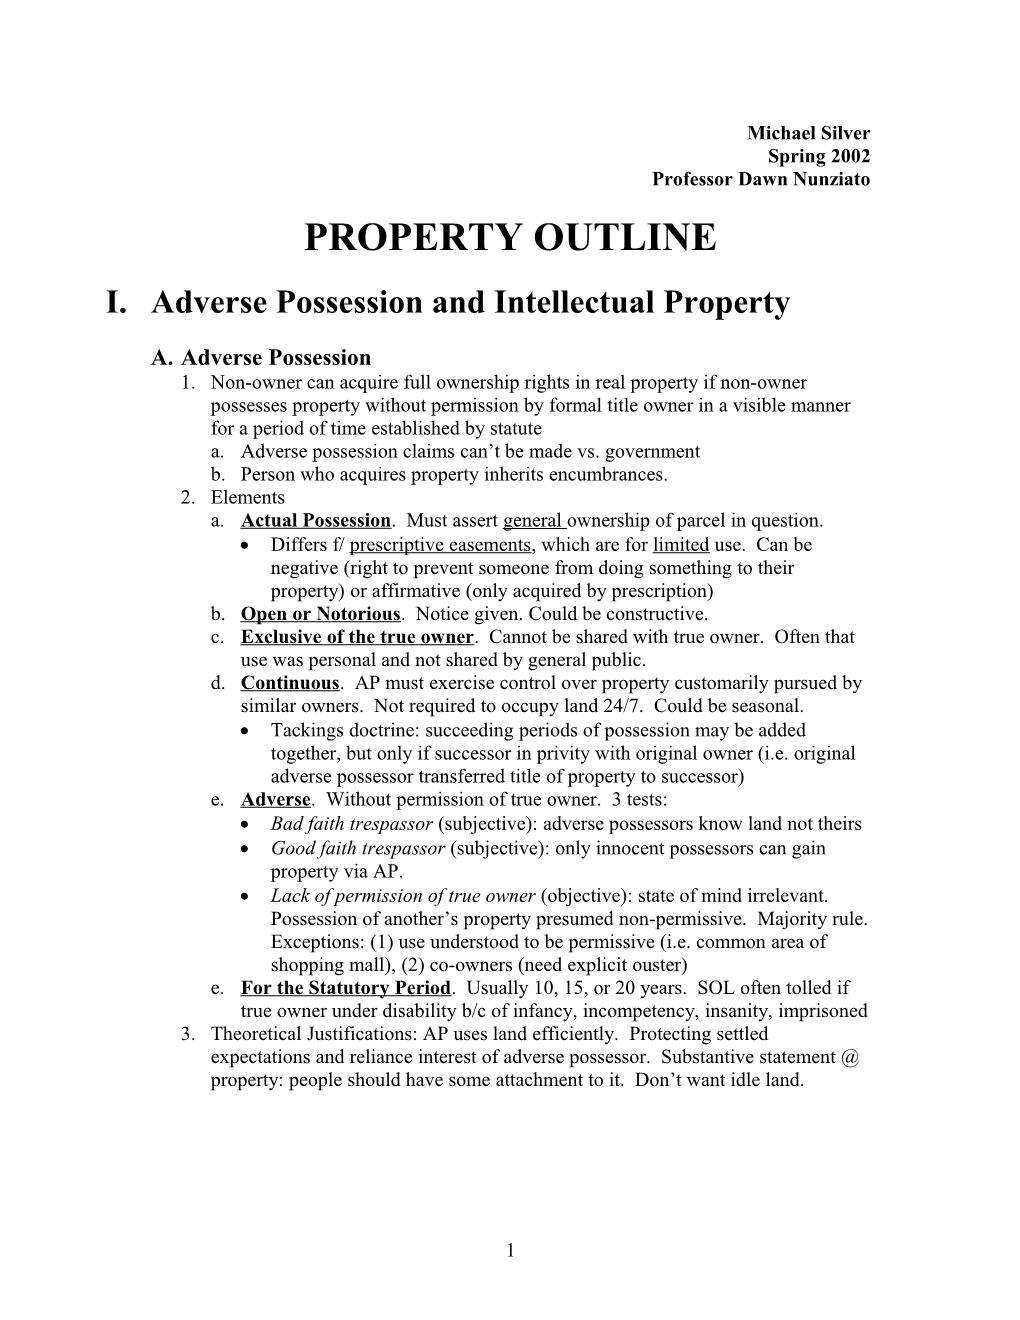 I. Adverse Possession and Intellectual Property